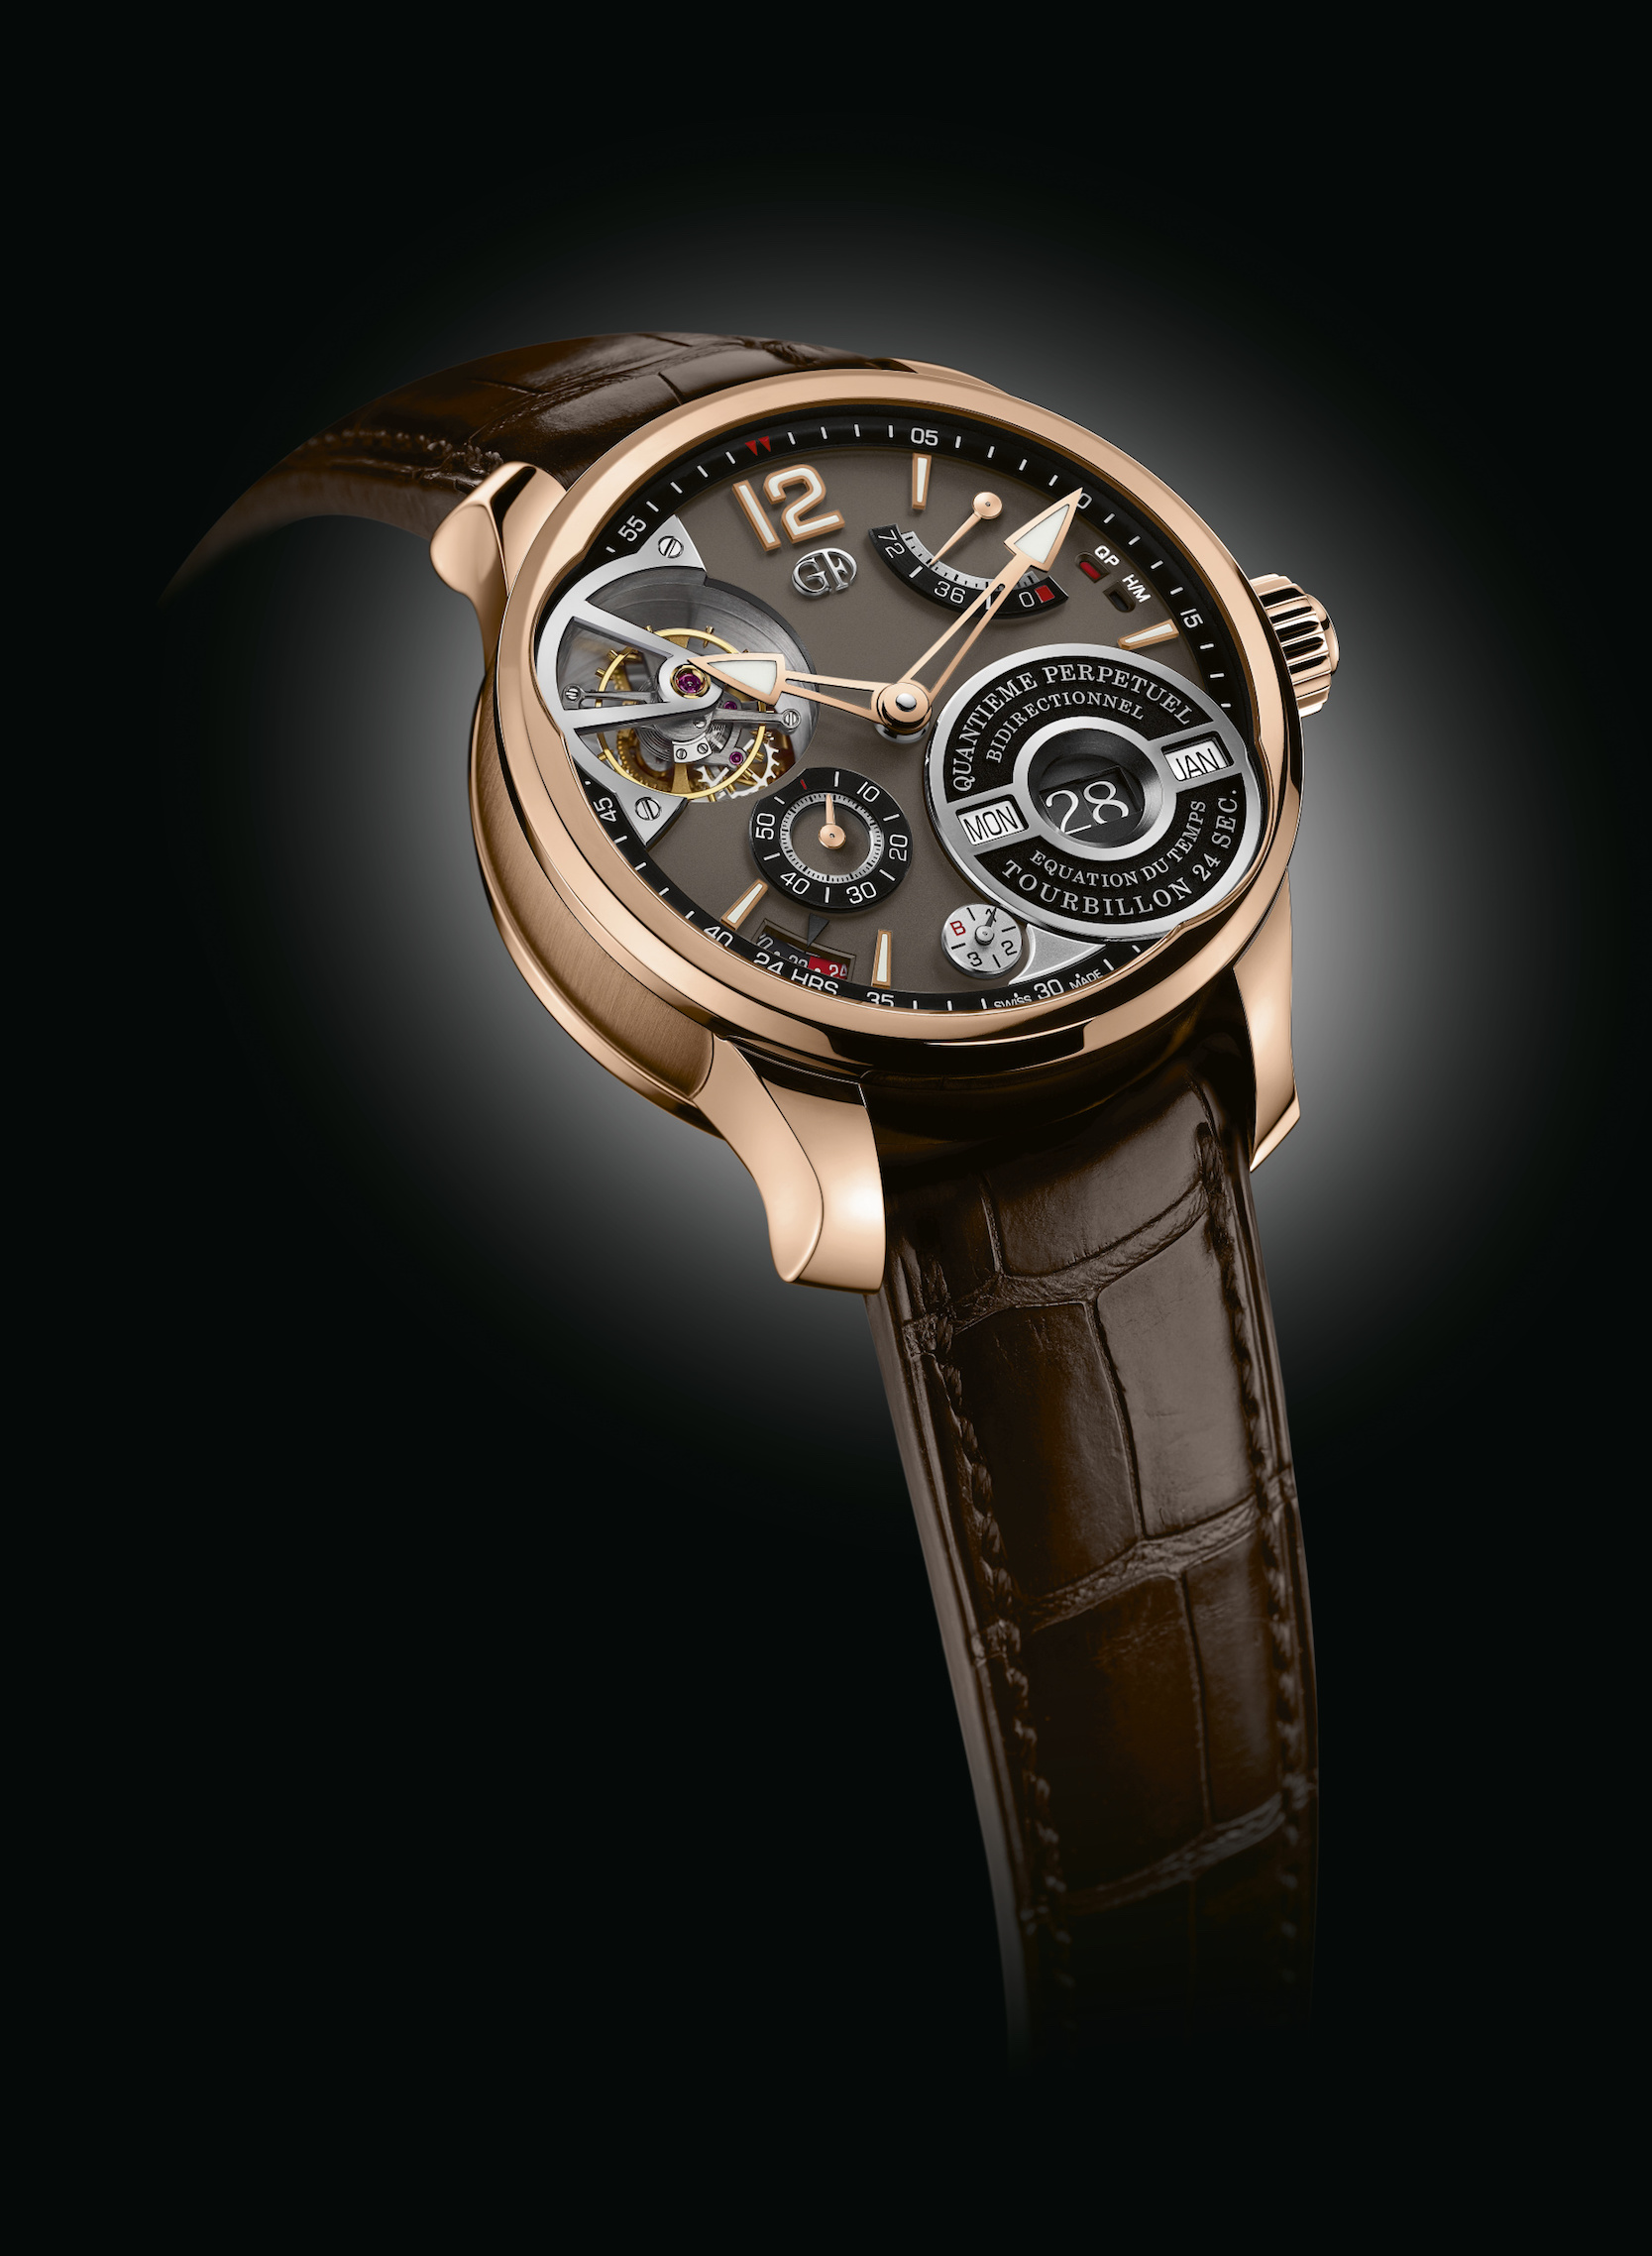 Greubel Forsey Presents The QP à Équation With Reinvention Of The Perpetual Calendar